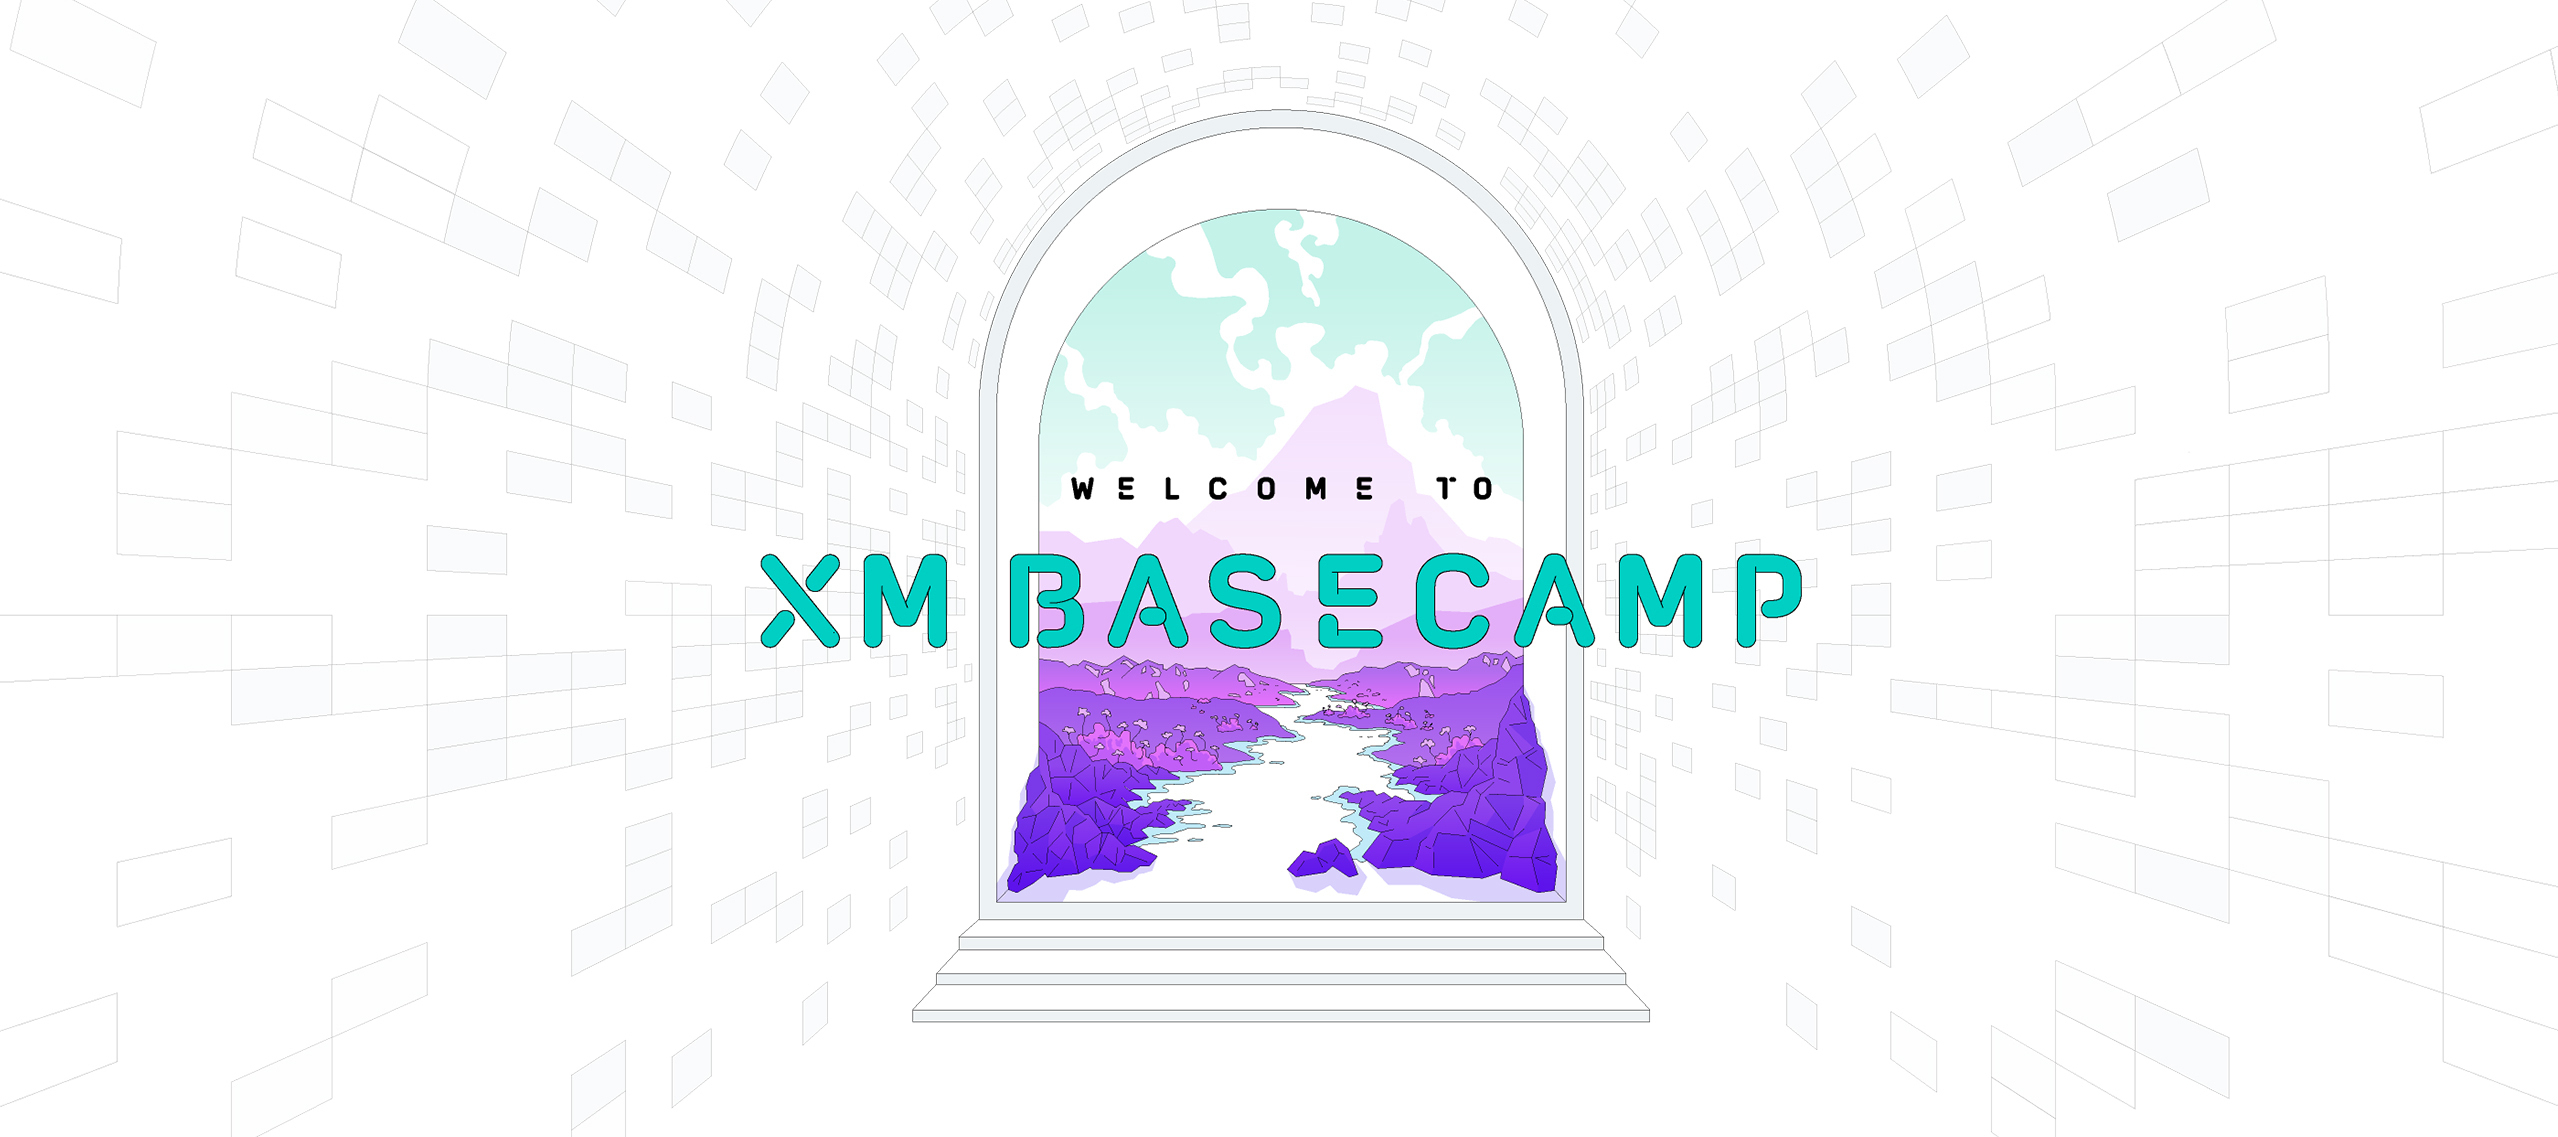 Changes to Localization on XM Basecamp